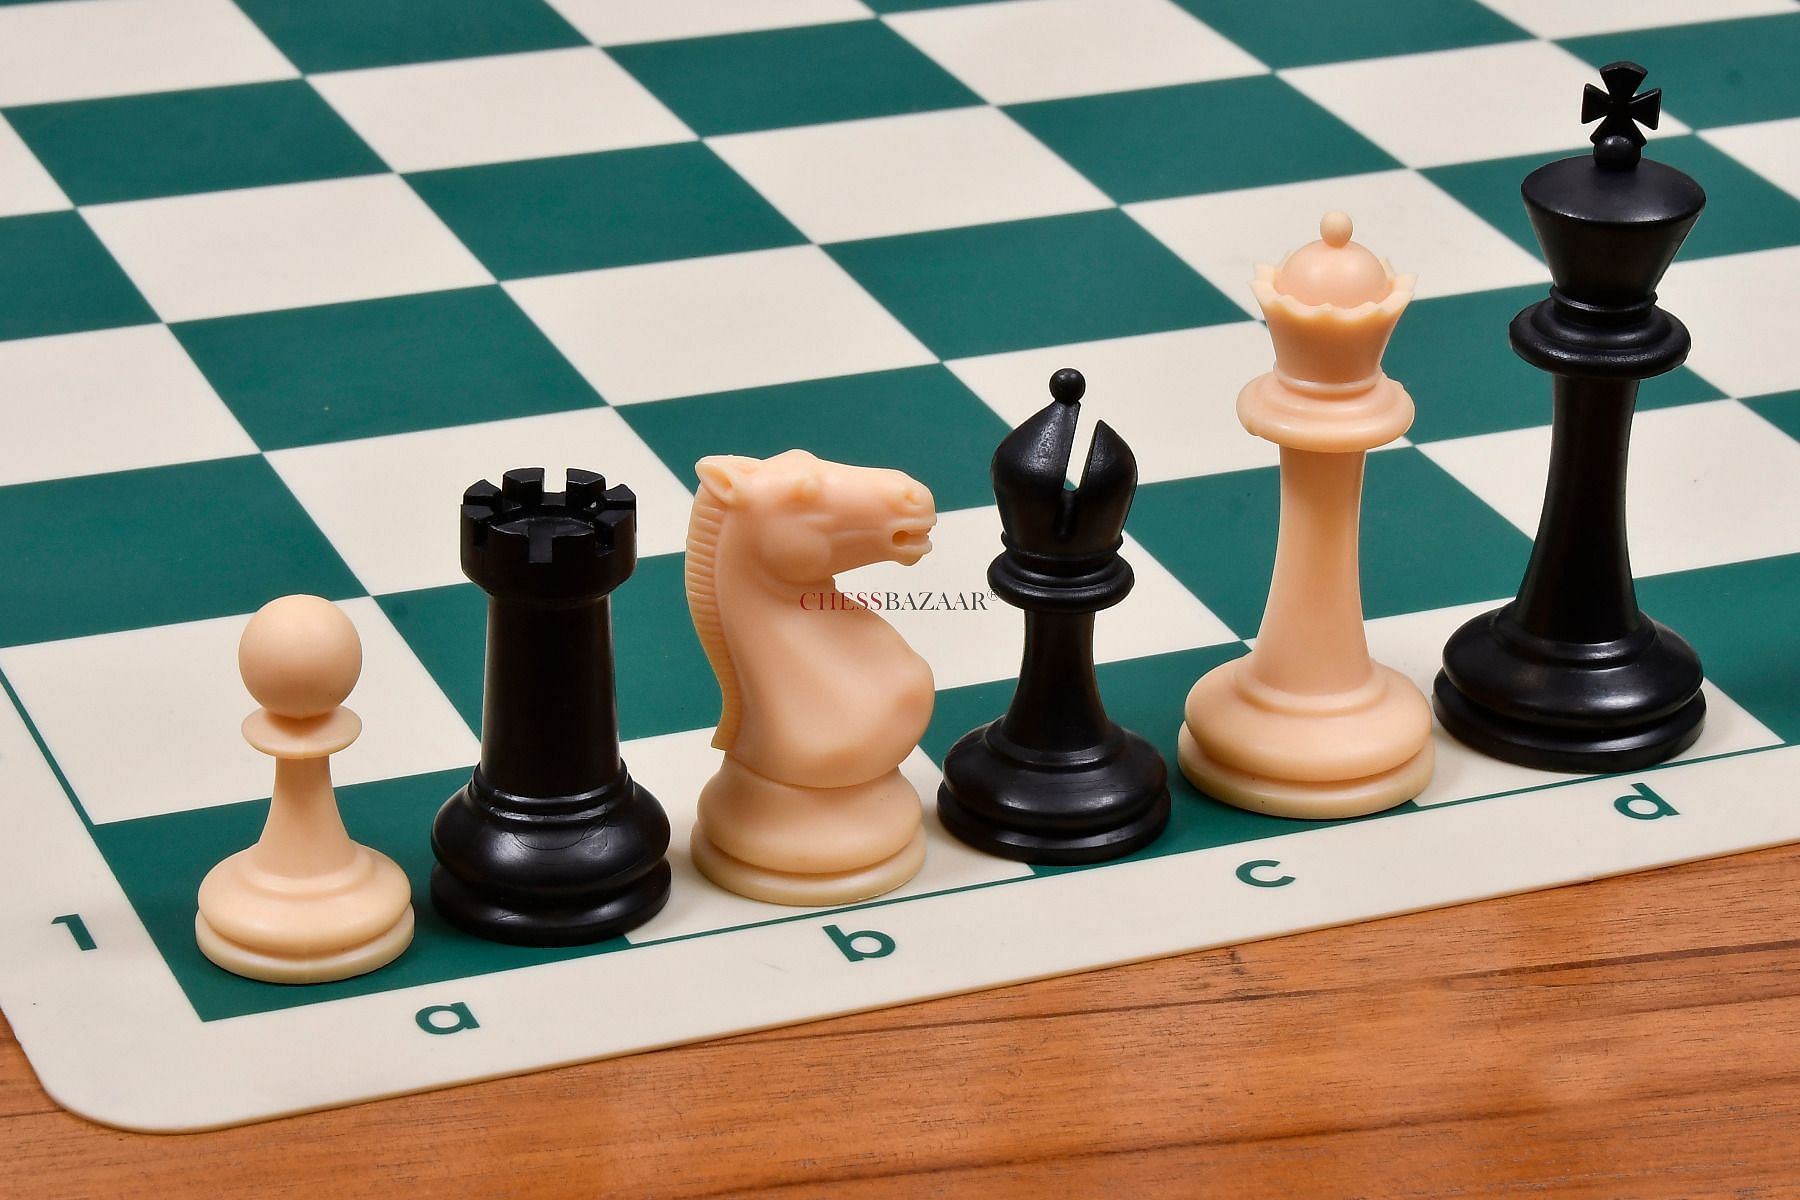 Competition Staunton Black Chess Set With Solid Wooden Box And Board - The  Chess Store